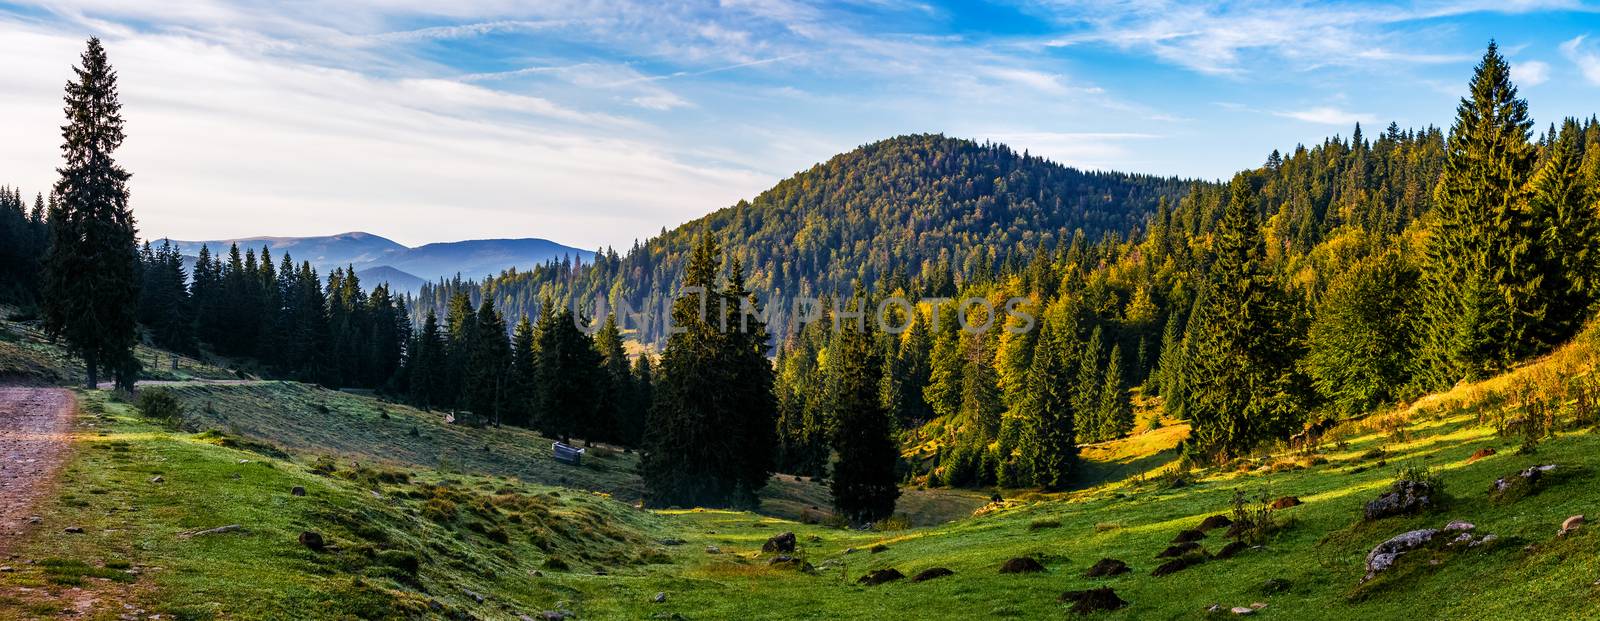 valley with forest in mountains of Romania by Pellinni